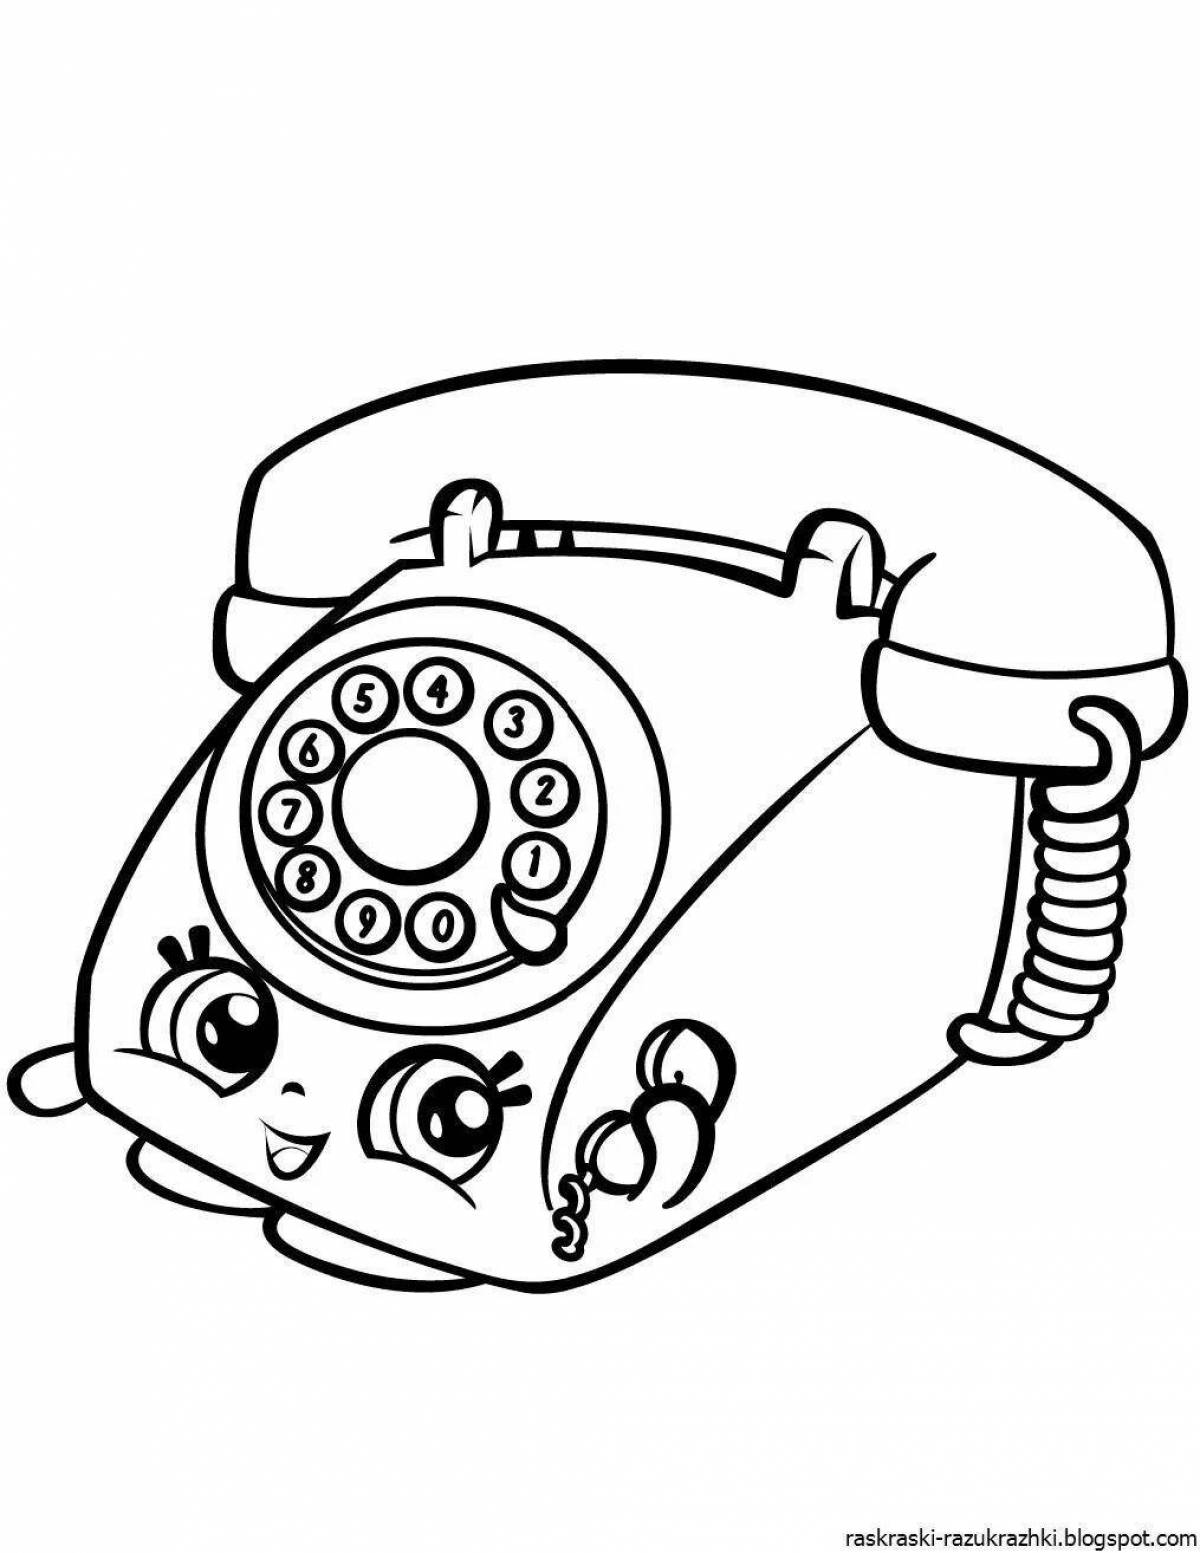 Charming phone coloring page